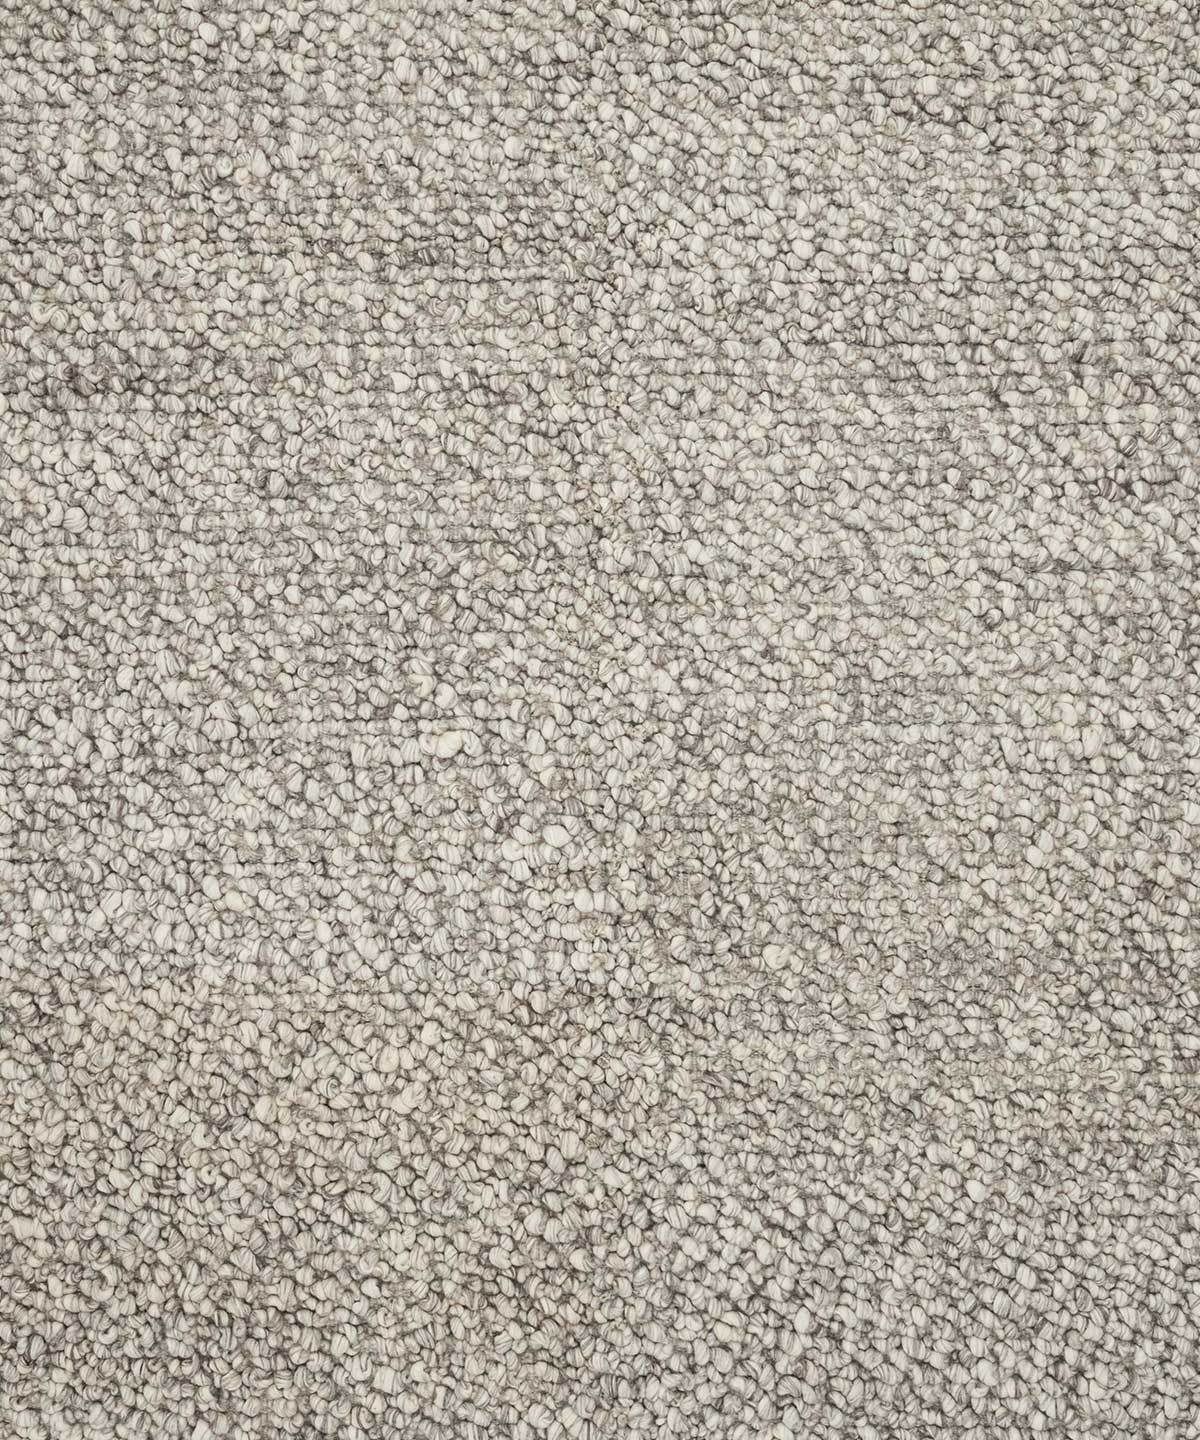 Quarry Rug in Stone by Loloi | TRNK